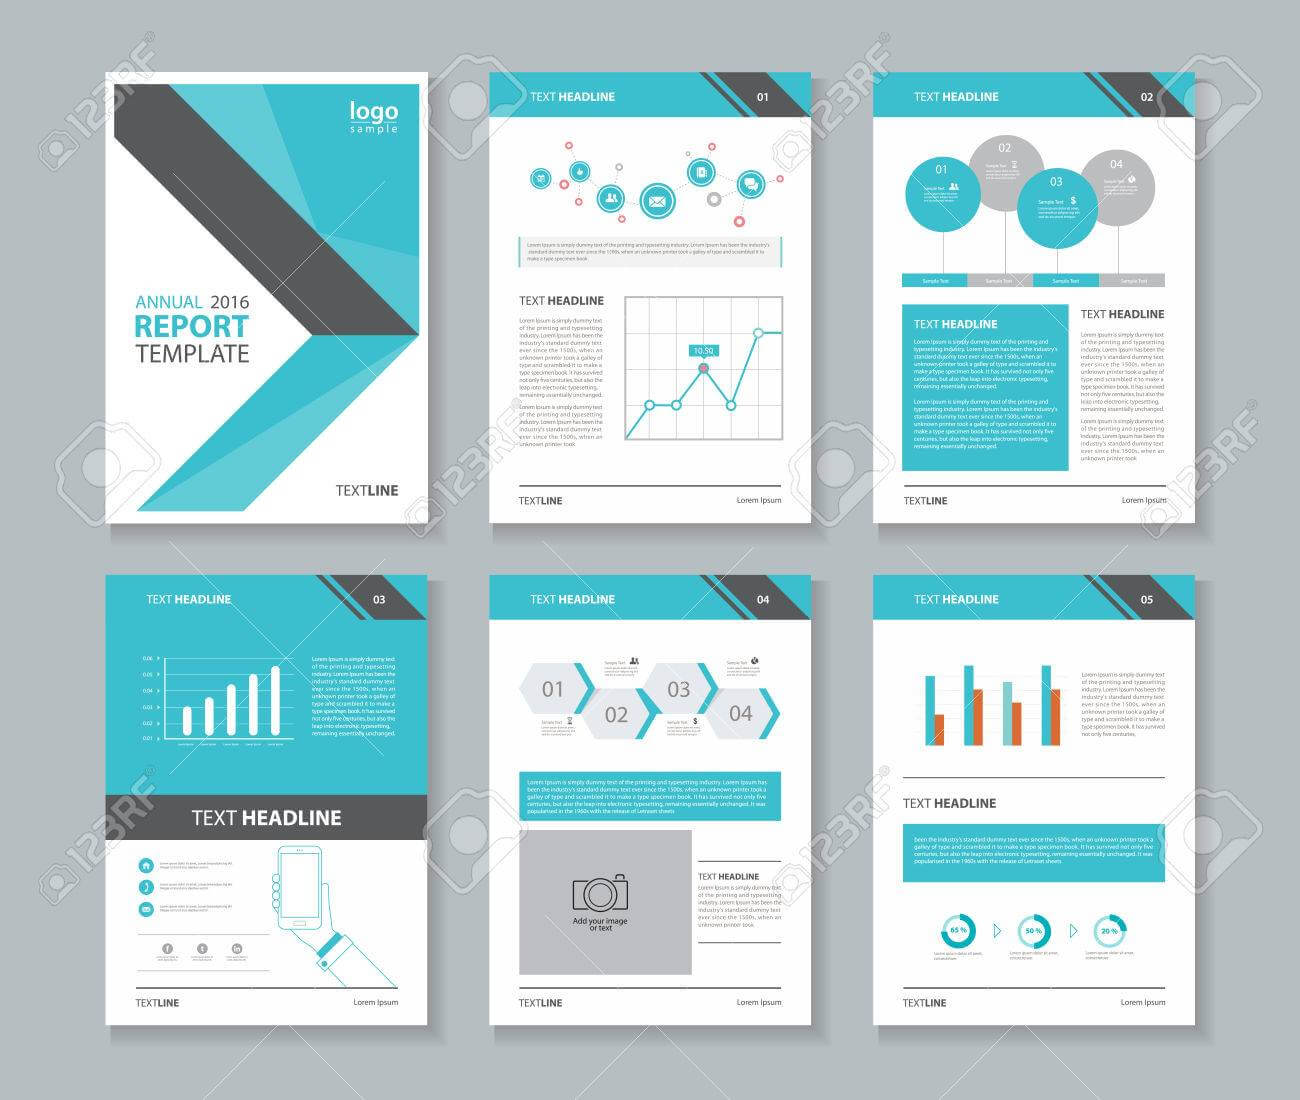 001 Template Ideas Annual Report Layout Frightening Free Pertaining To Annual Report Template Word Free Download